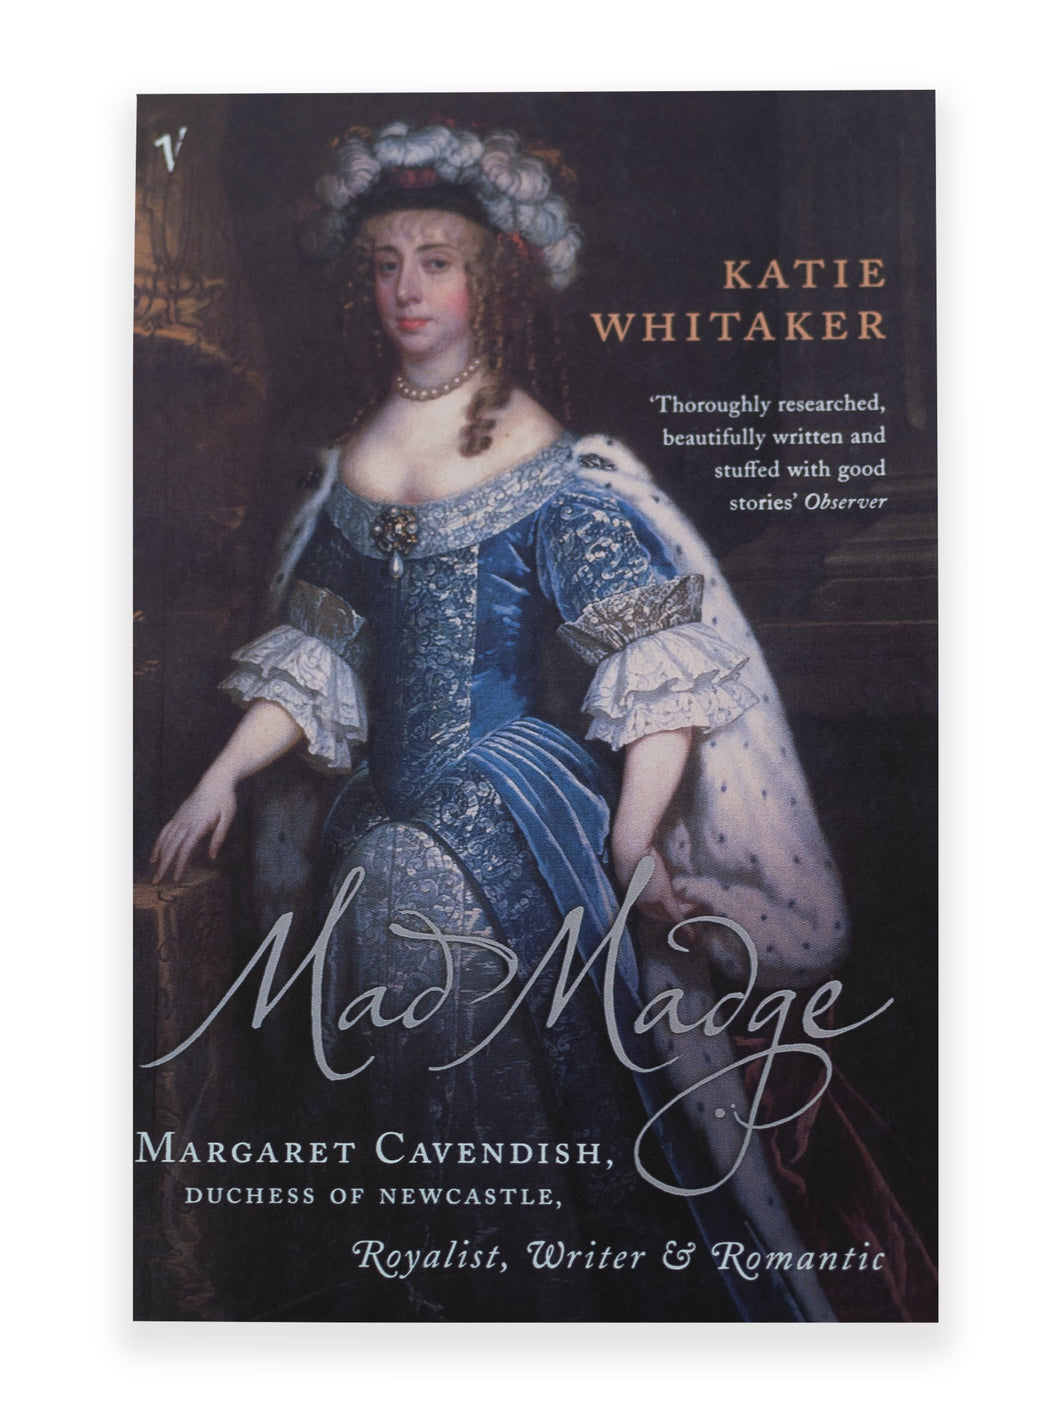 Katie Whitaker - Mad Madge, Margaret Cavendish, Duchess of Newcastle. Front Cover. Book for sale from the Harley Gallery online shop.